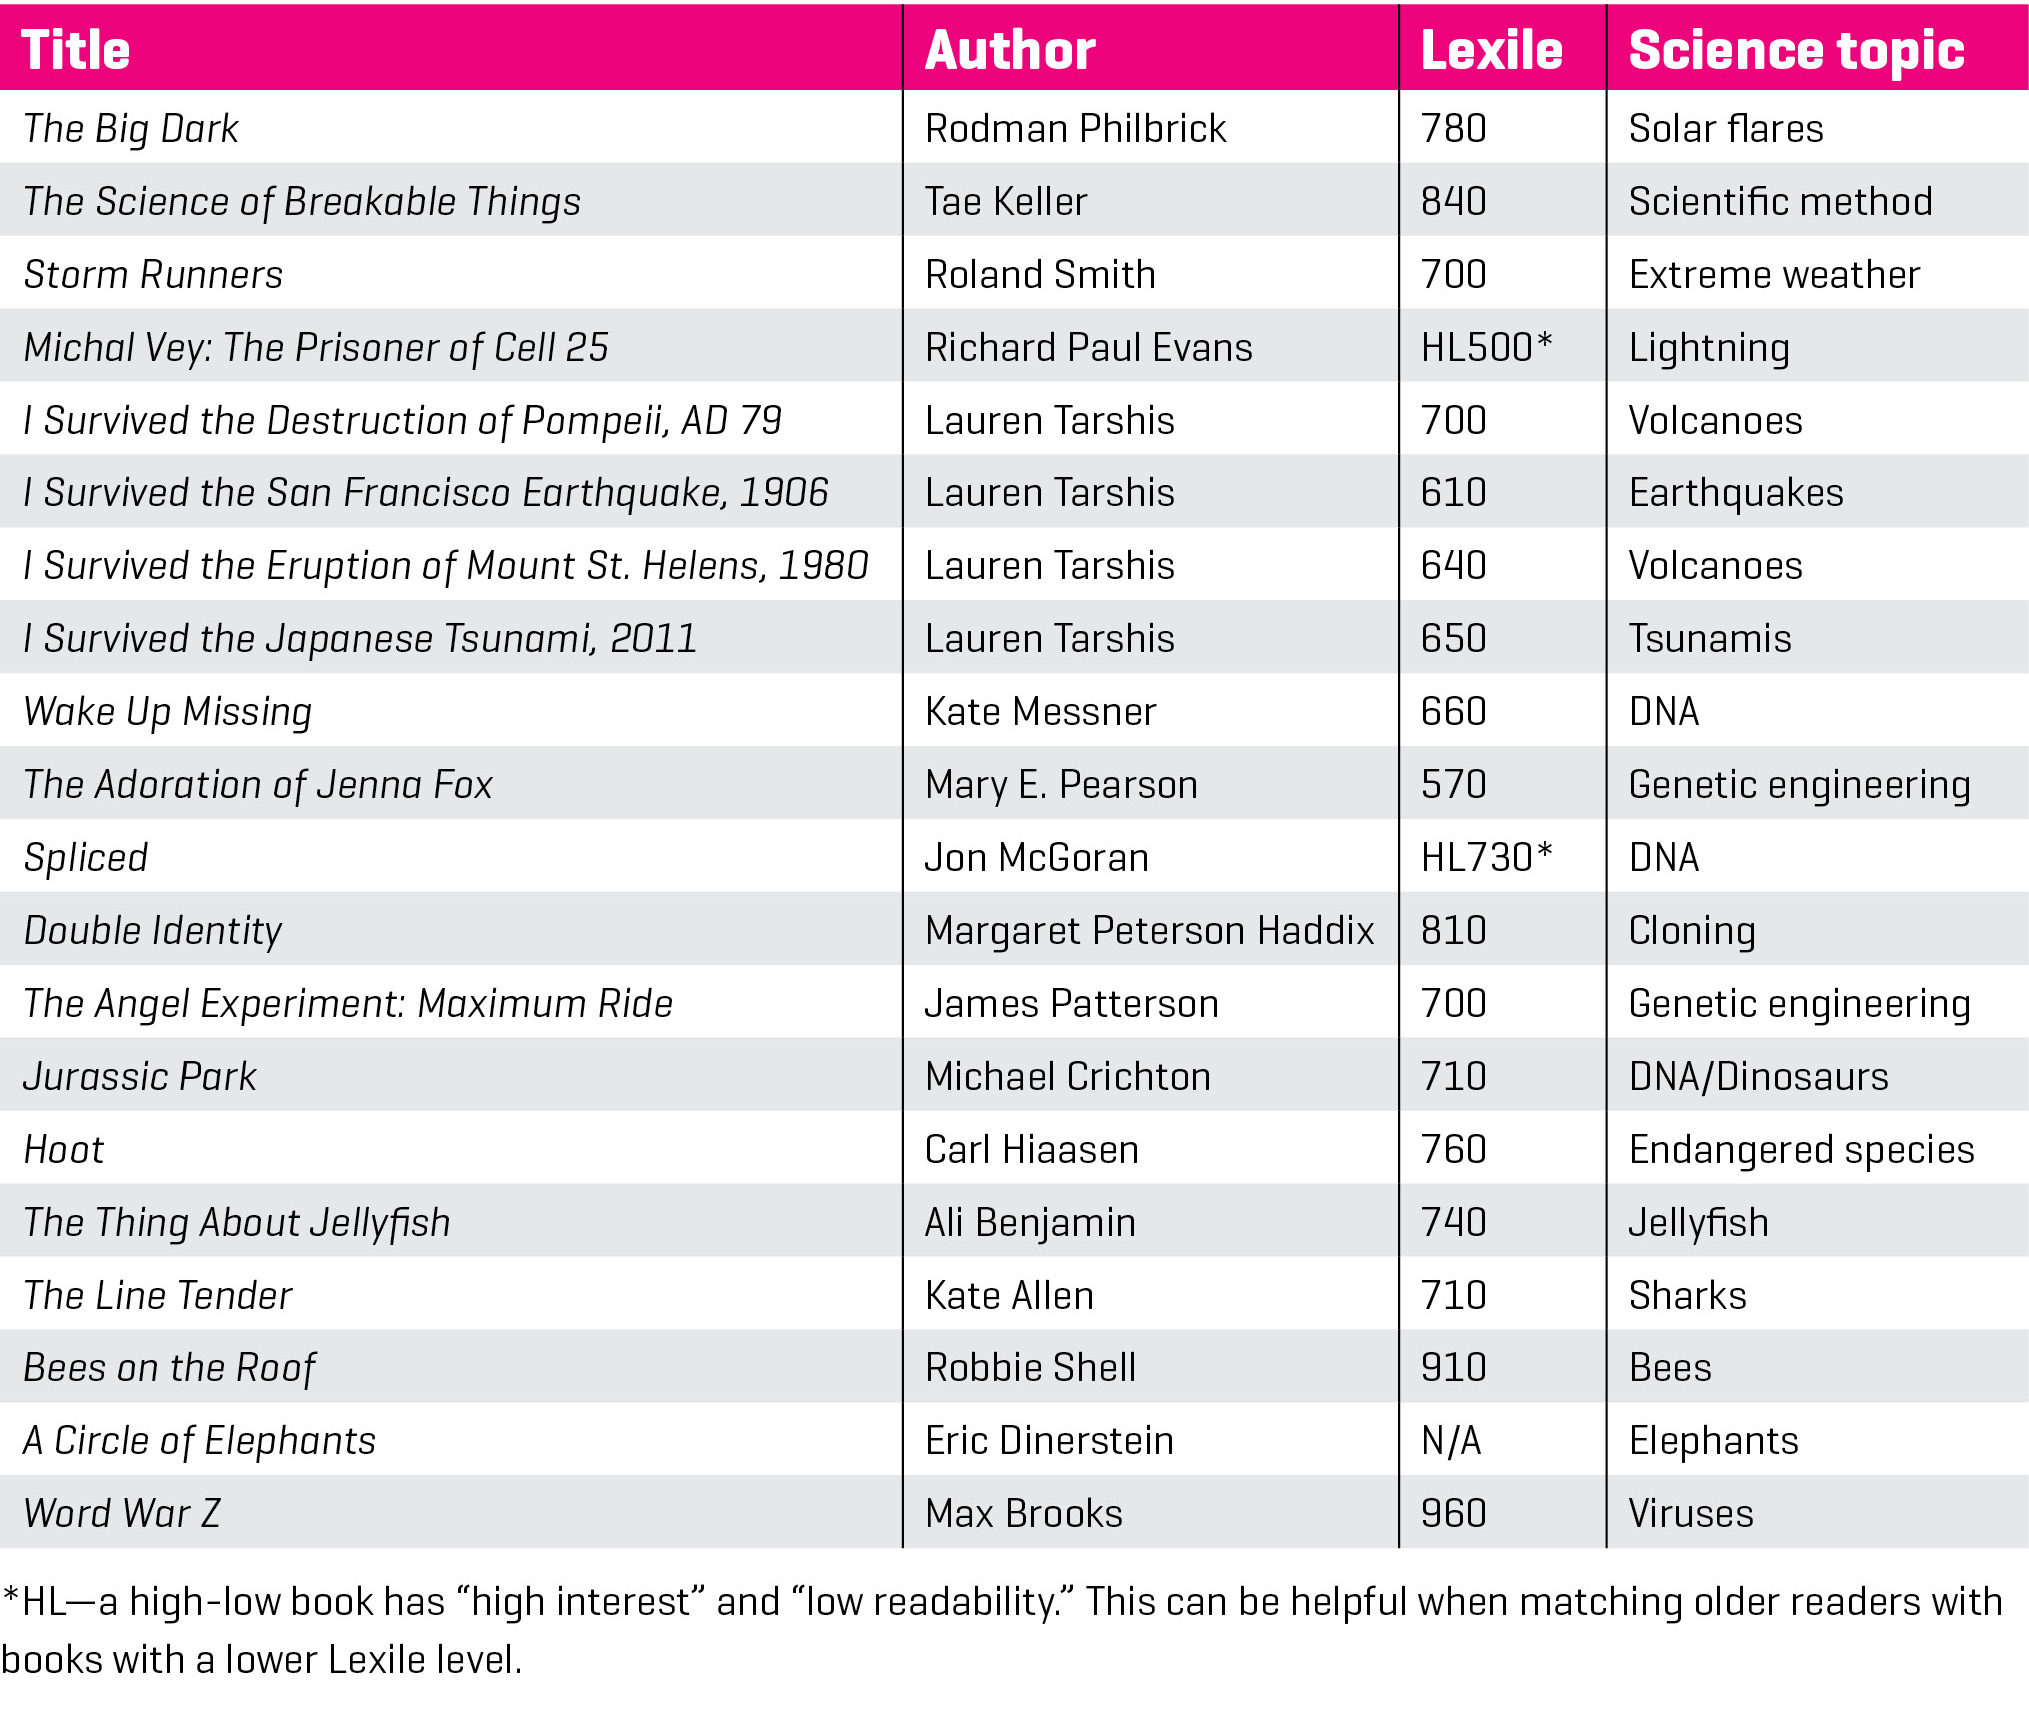 | Figure 2: Science-themed fiction books mentioned in this article, with a range of Lexile levels.